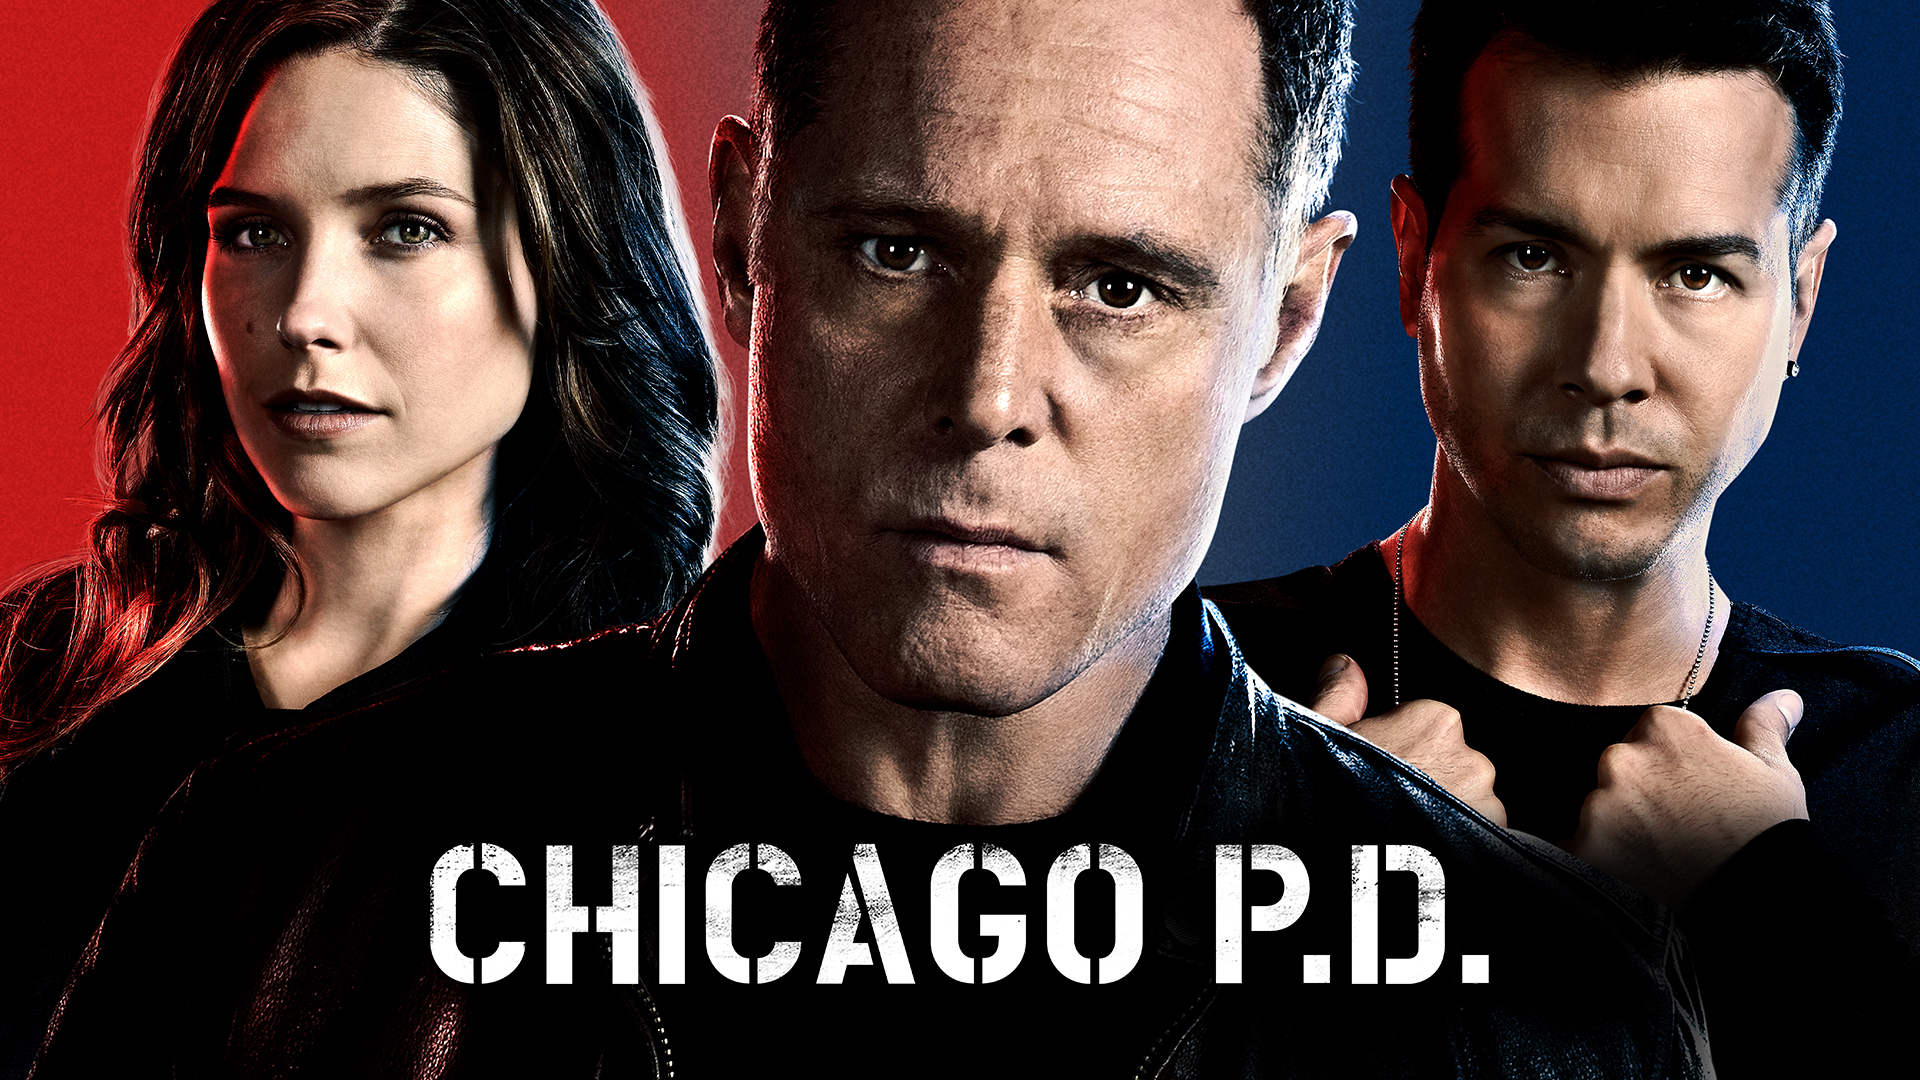 Amazing Chicago P.D. Pictures & Backgrounds